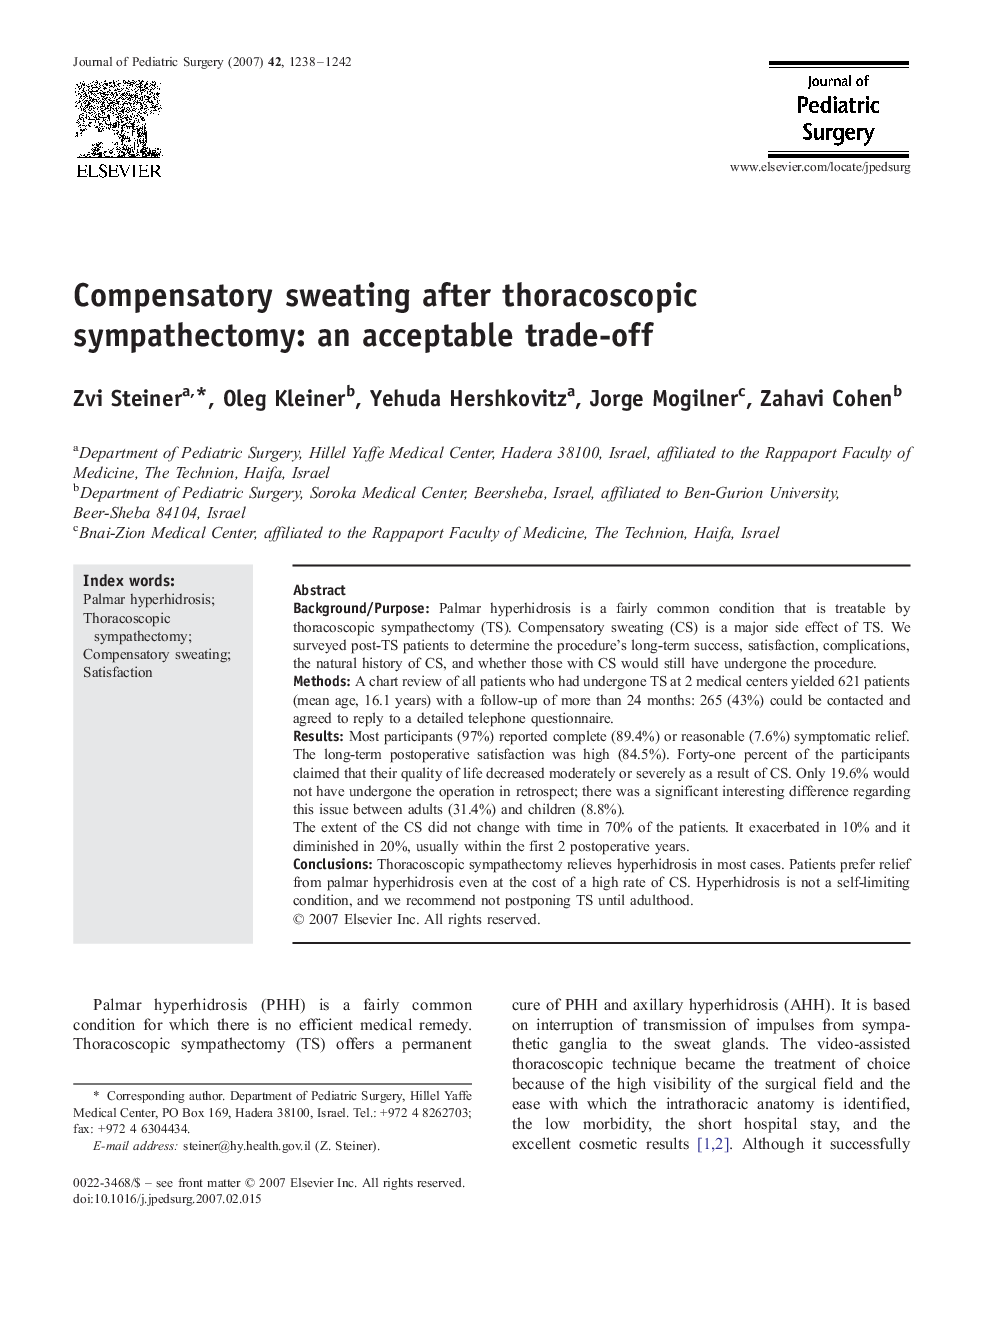 Compensatory sweating after thoracoscopic sympathectomy: an acceptable trade-off